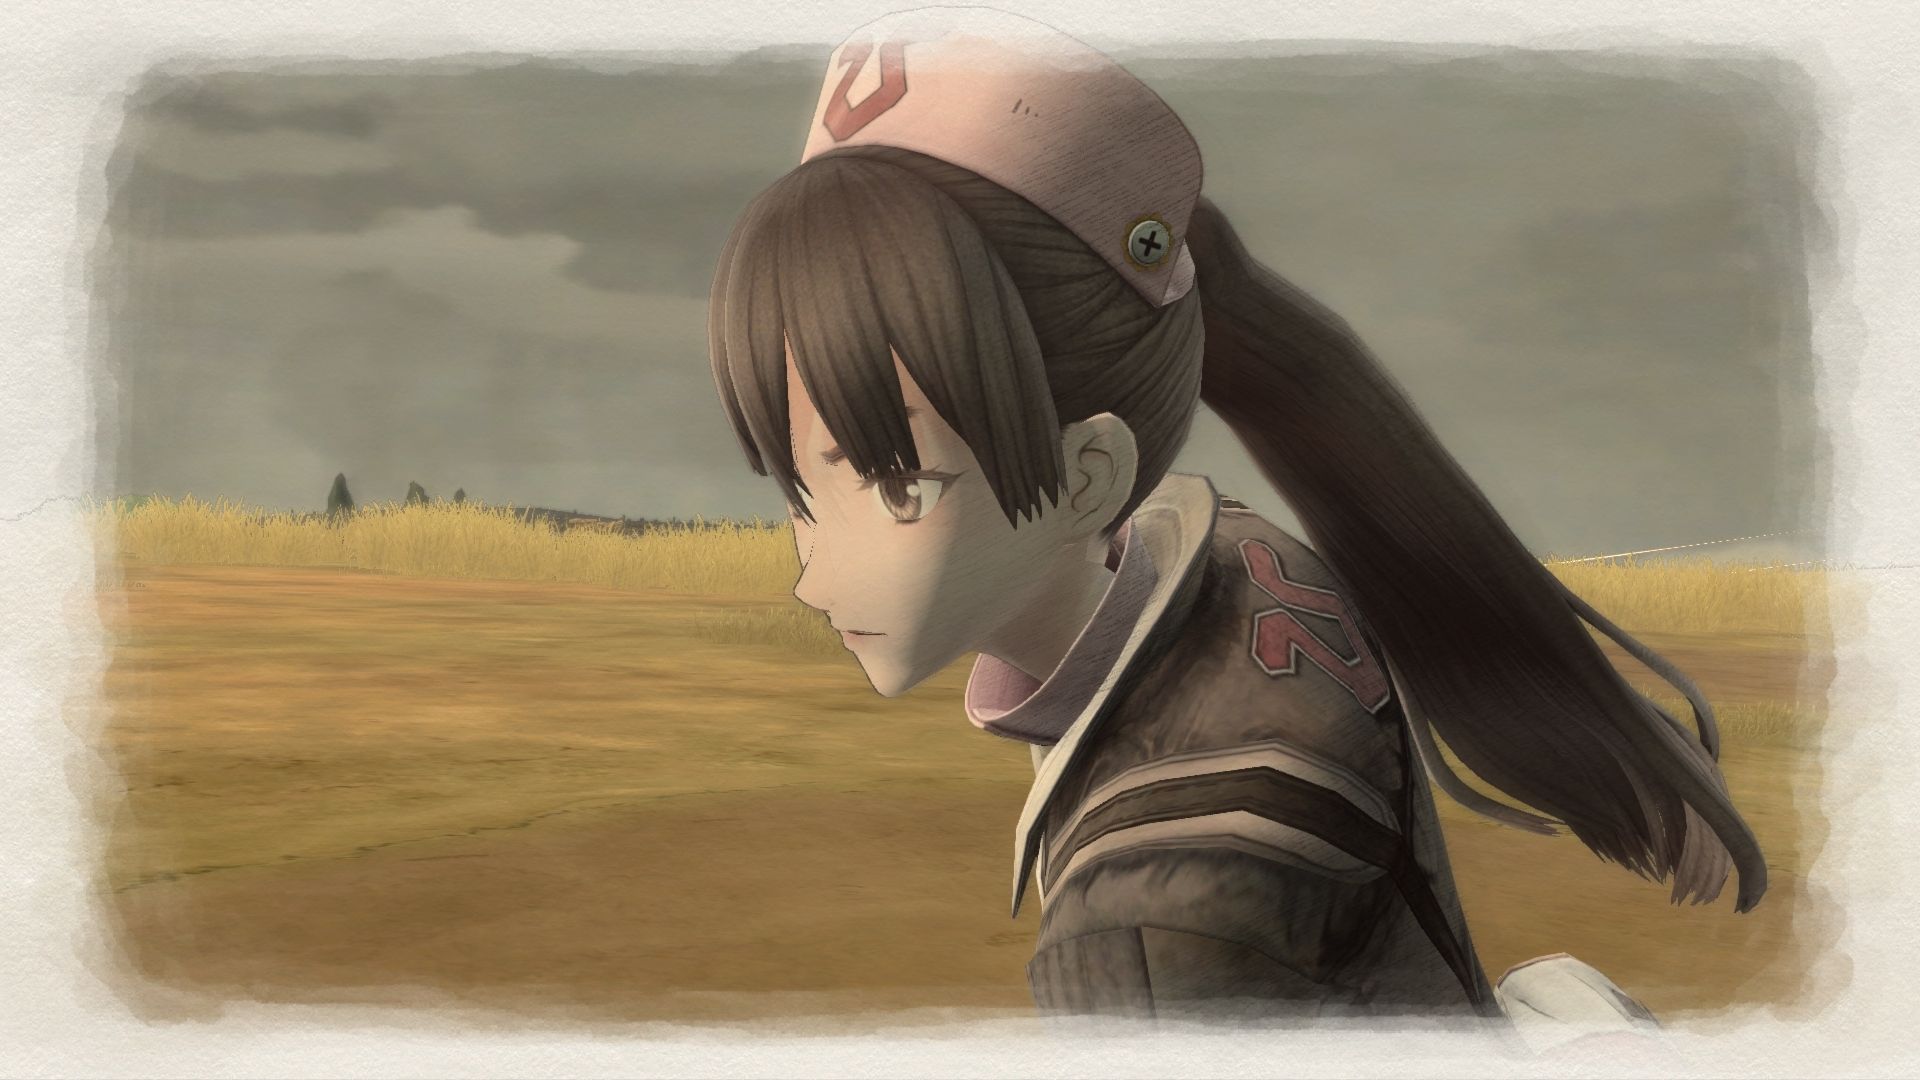 http://www.perfectly-nintendo.com/wp-content/gallery/valkyria-chronicles-4-27-12-2017/31.jpg